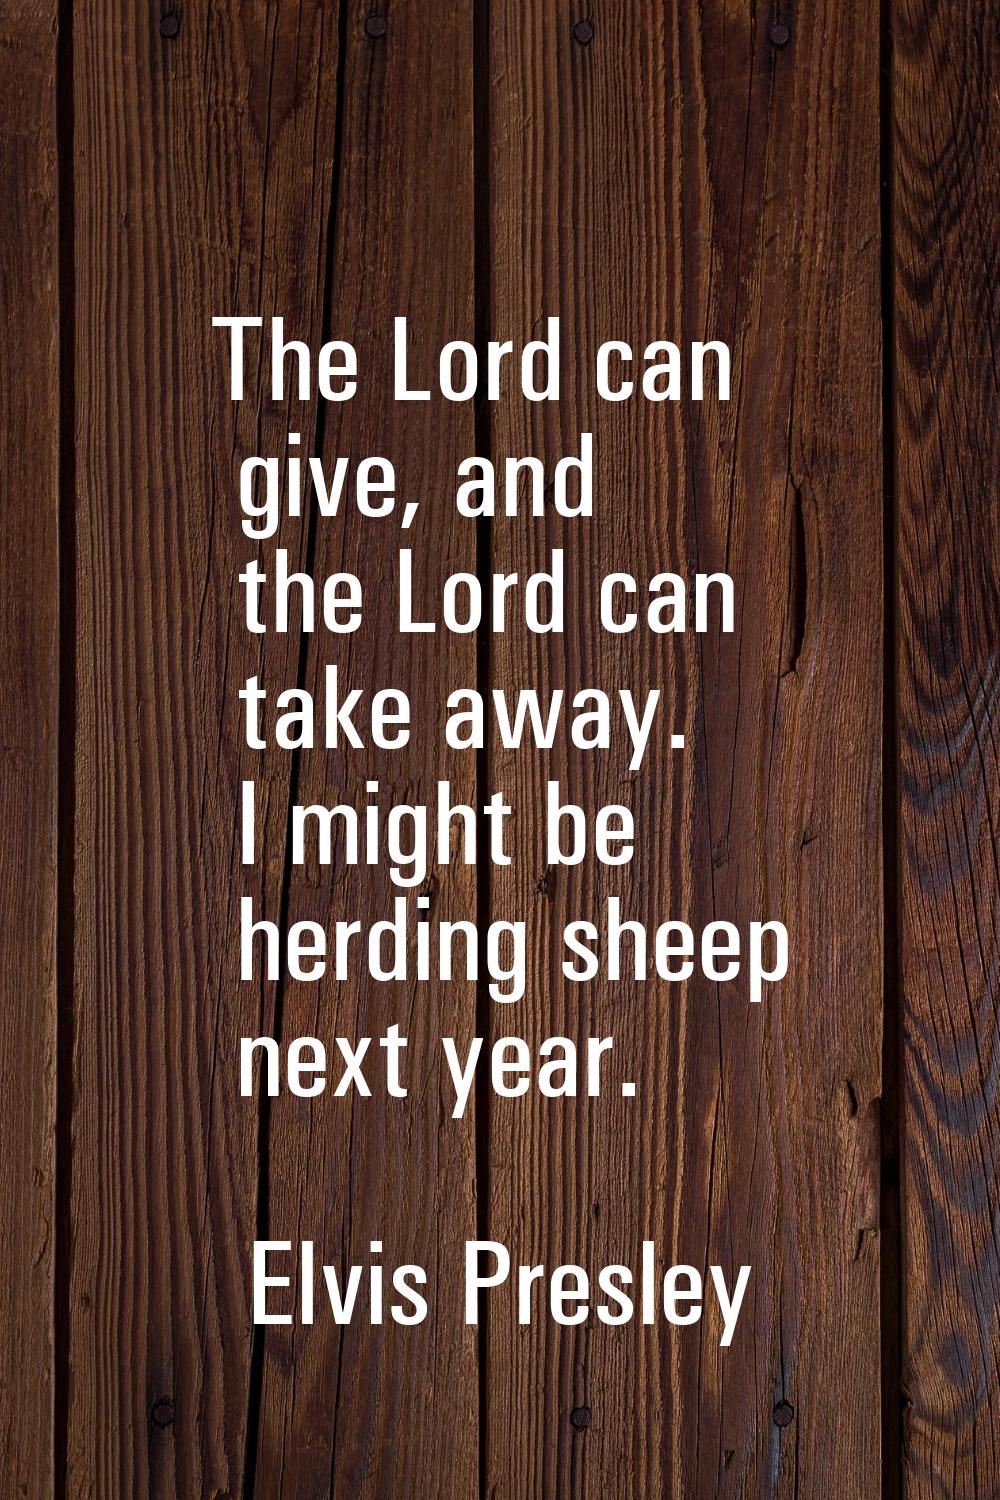 The Lord can give, and the Lord can take away. I might be herding sheep next year.